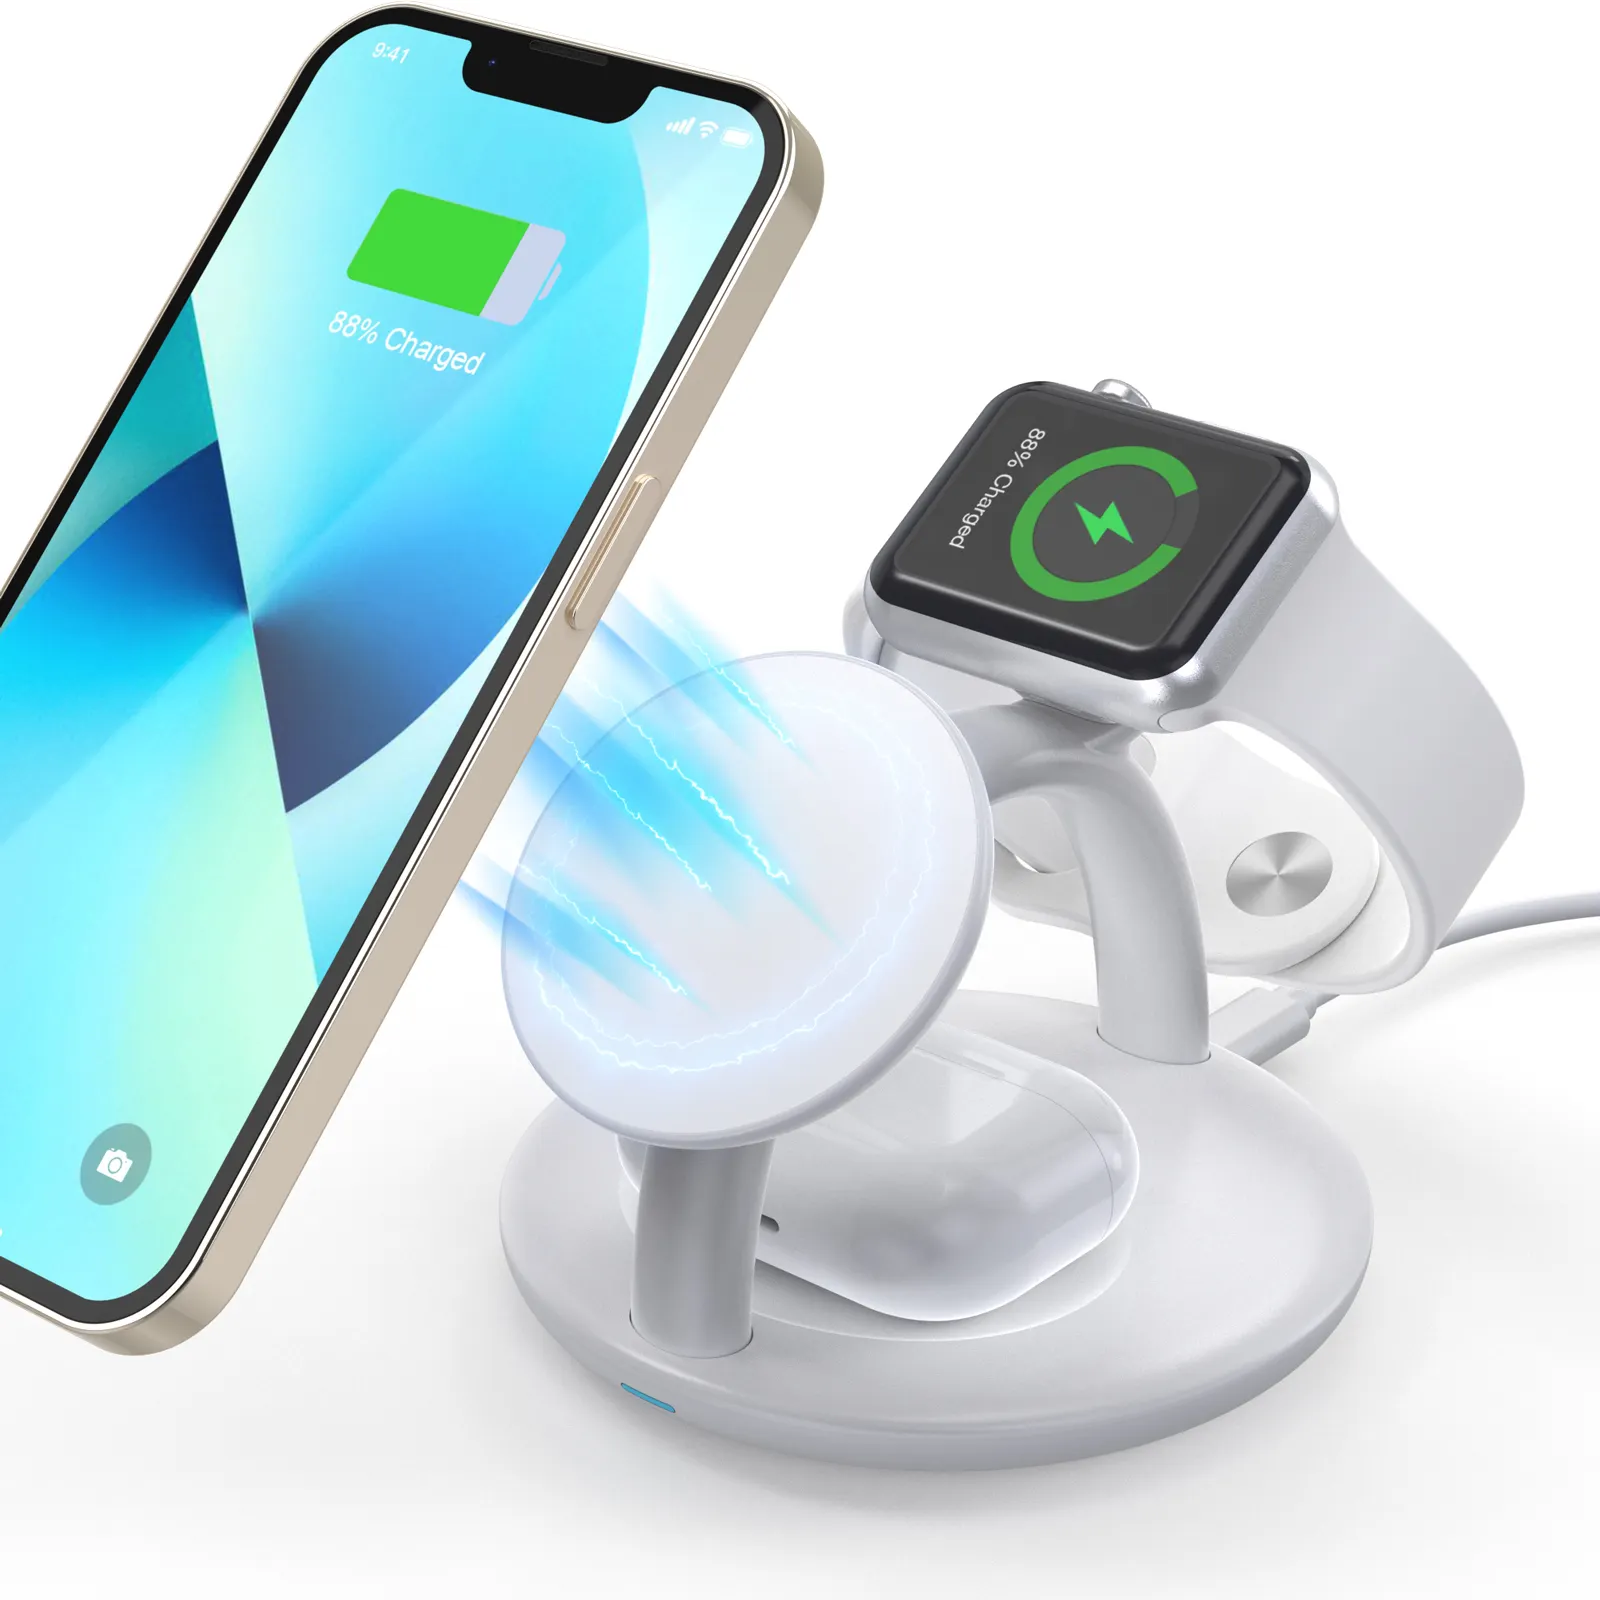 Magnetic Fast Wireless Charger 3 in 1 Phone Holders Charging for Mobile Phones Earphones and Smart Watch Mounts